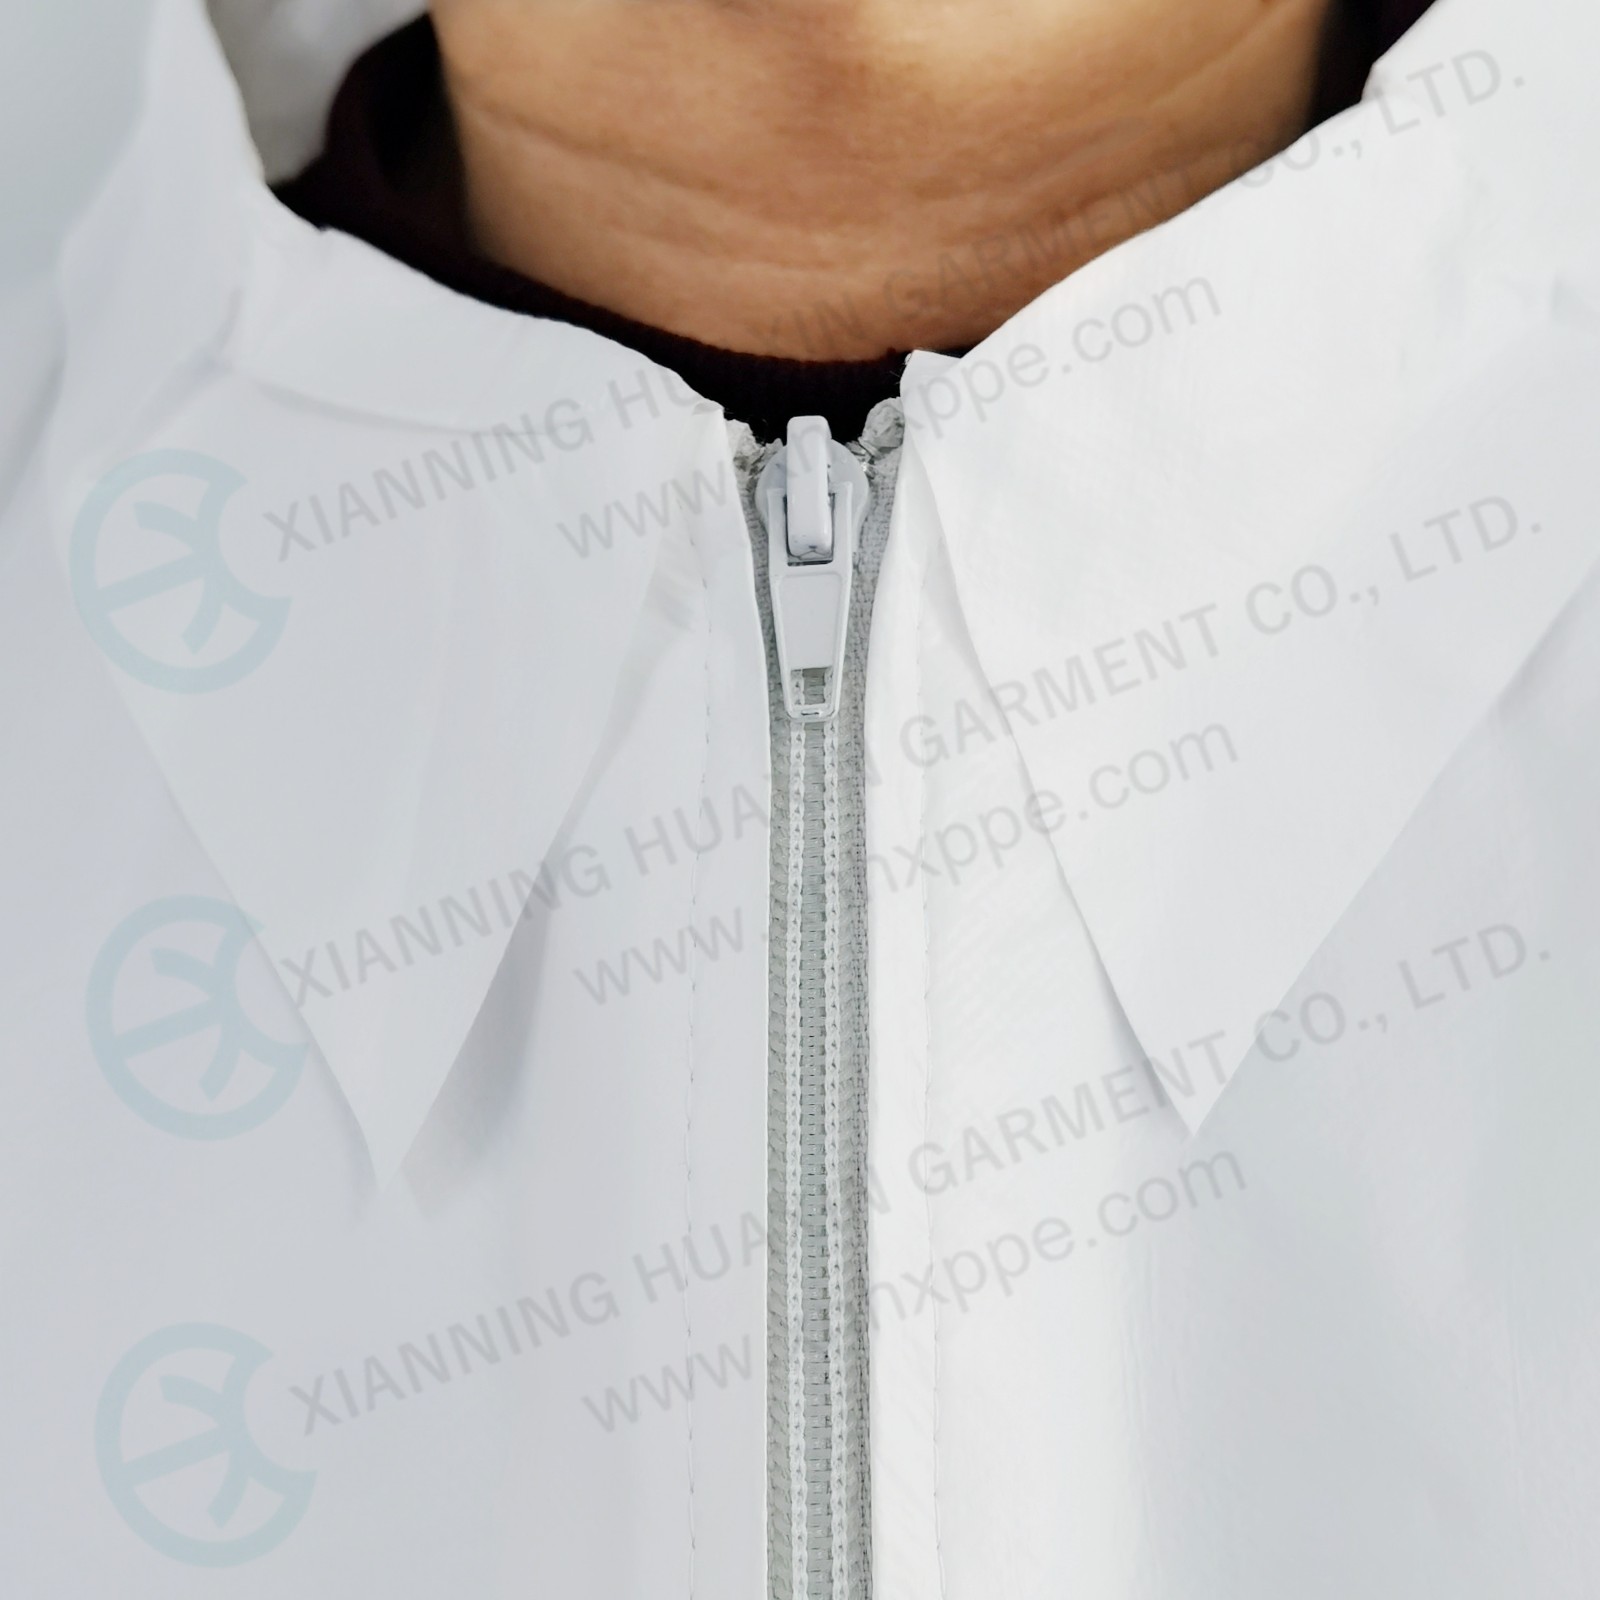 labcoat with double collars